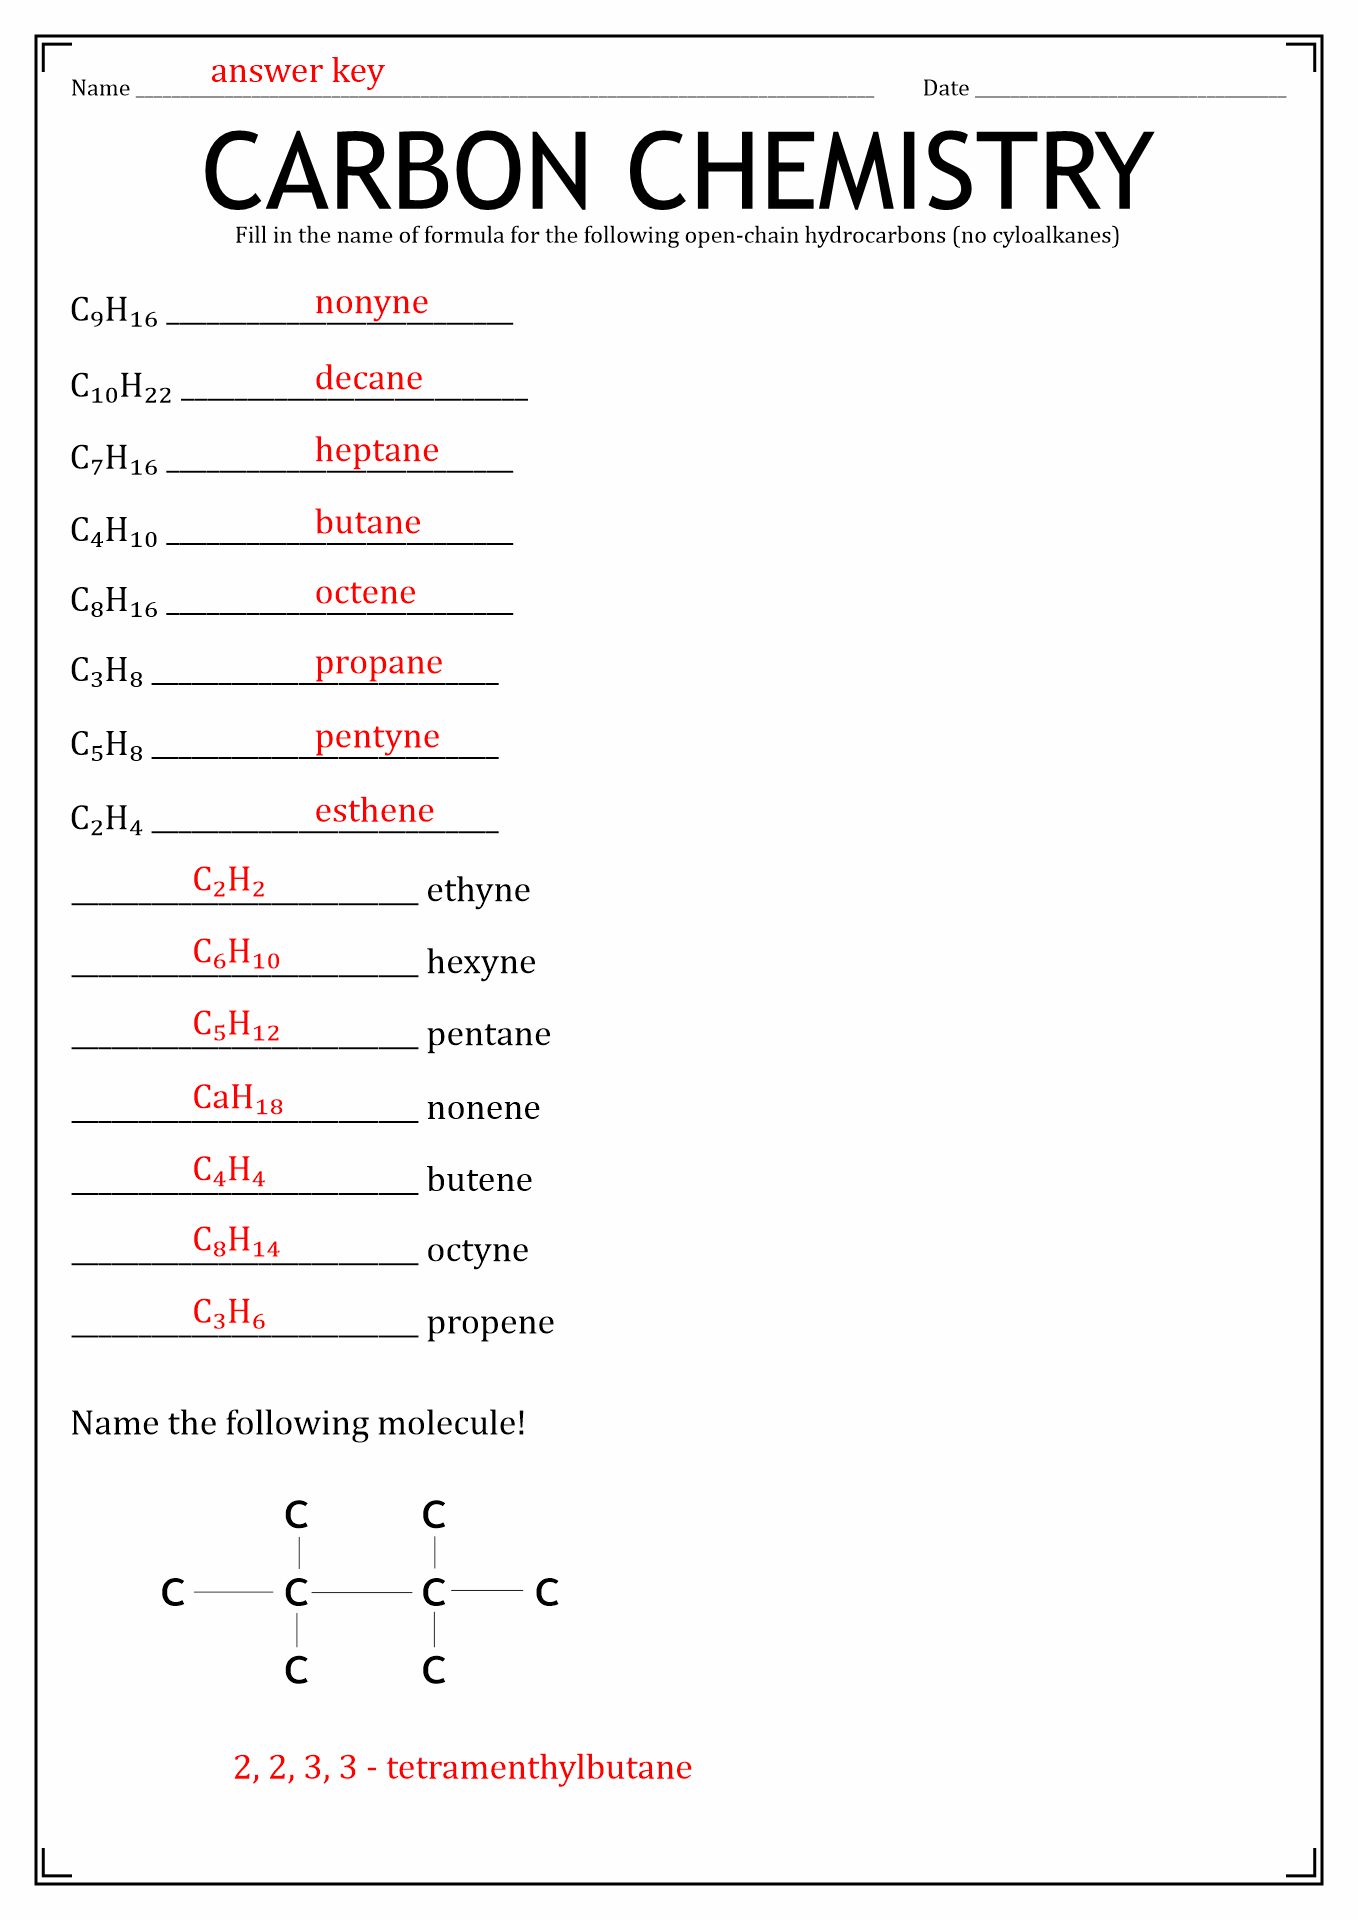 Organic Chemistry Nomenclature Worksheets with Answers Image